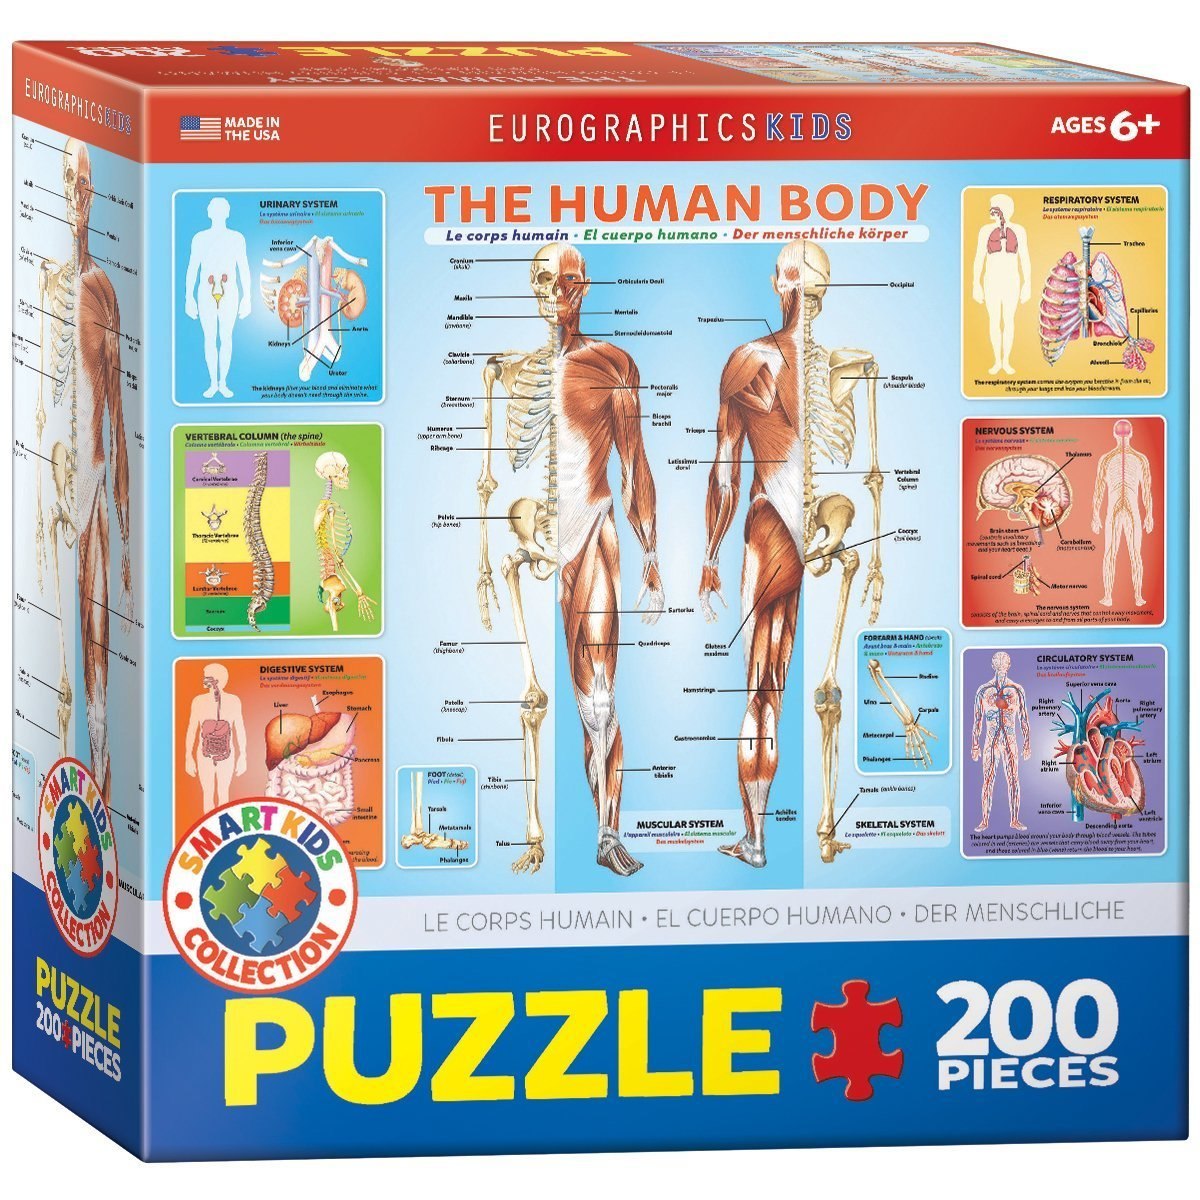 The Human Body - 200pc Jigsaw Puzzle by EuroGraphics  			  					NEW